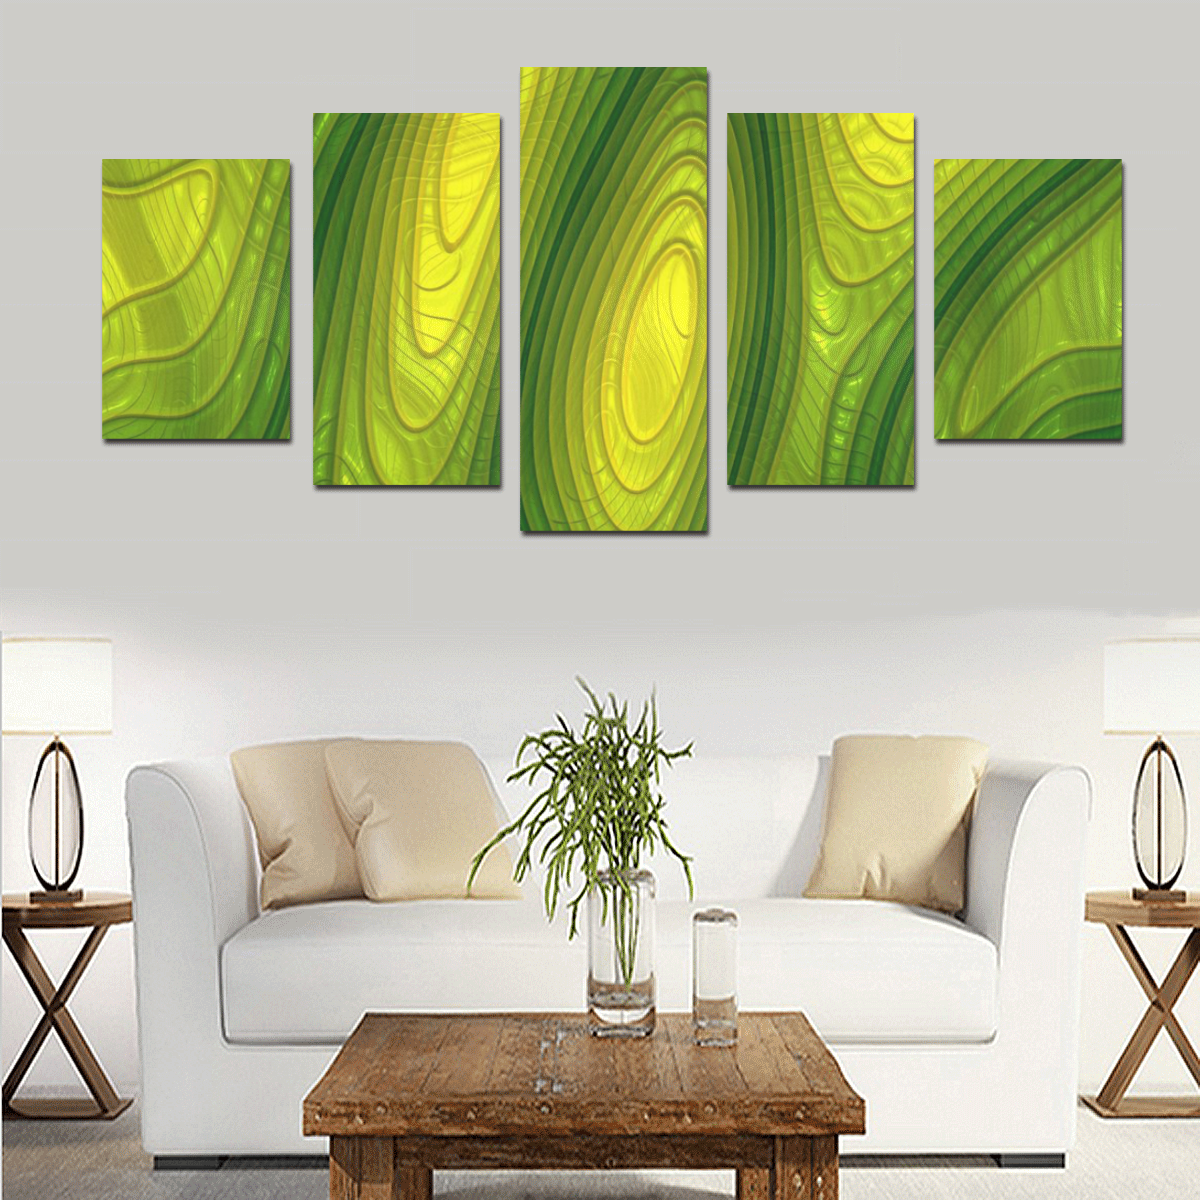 glossy 3D abstract 02 by JamColors Canvas Print Sets D (No Frame)